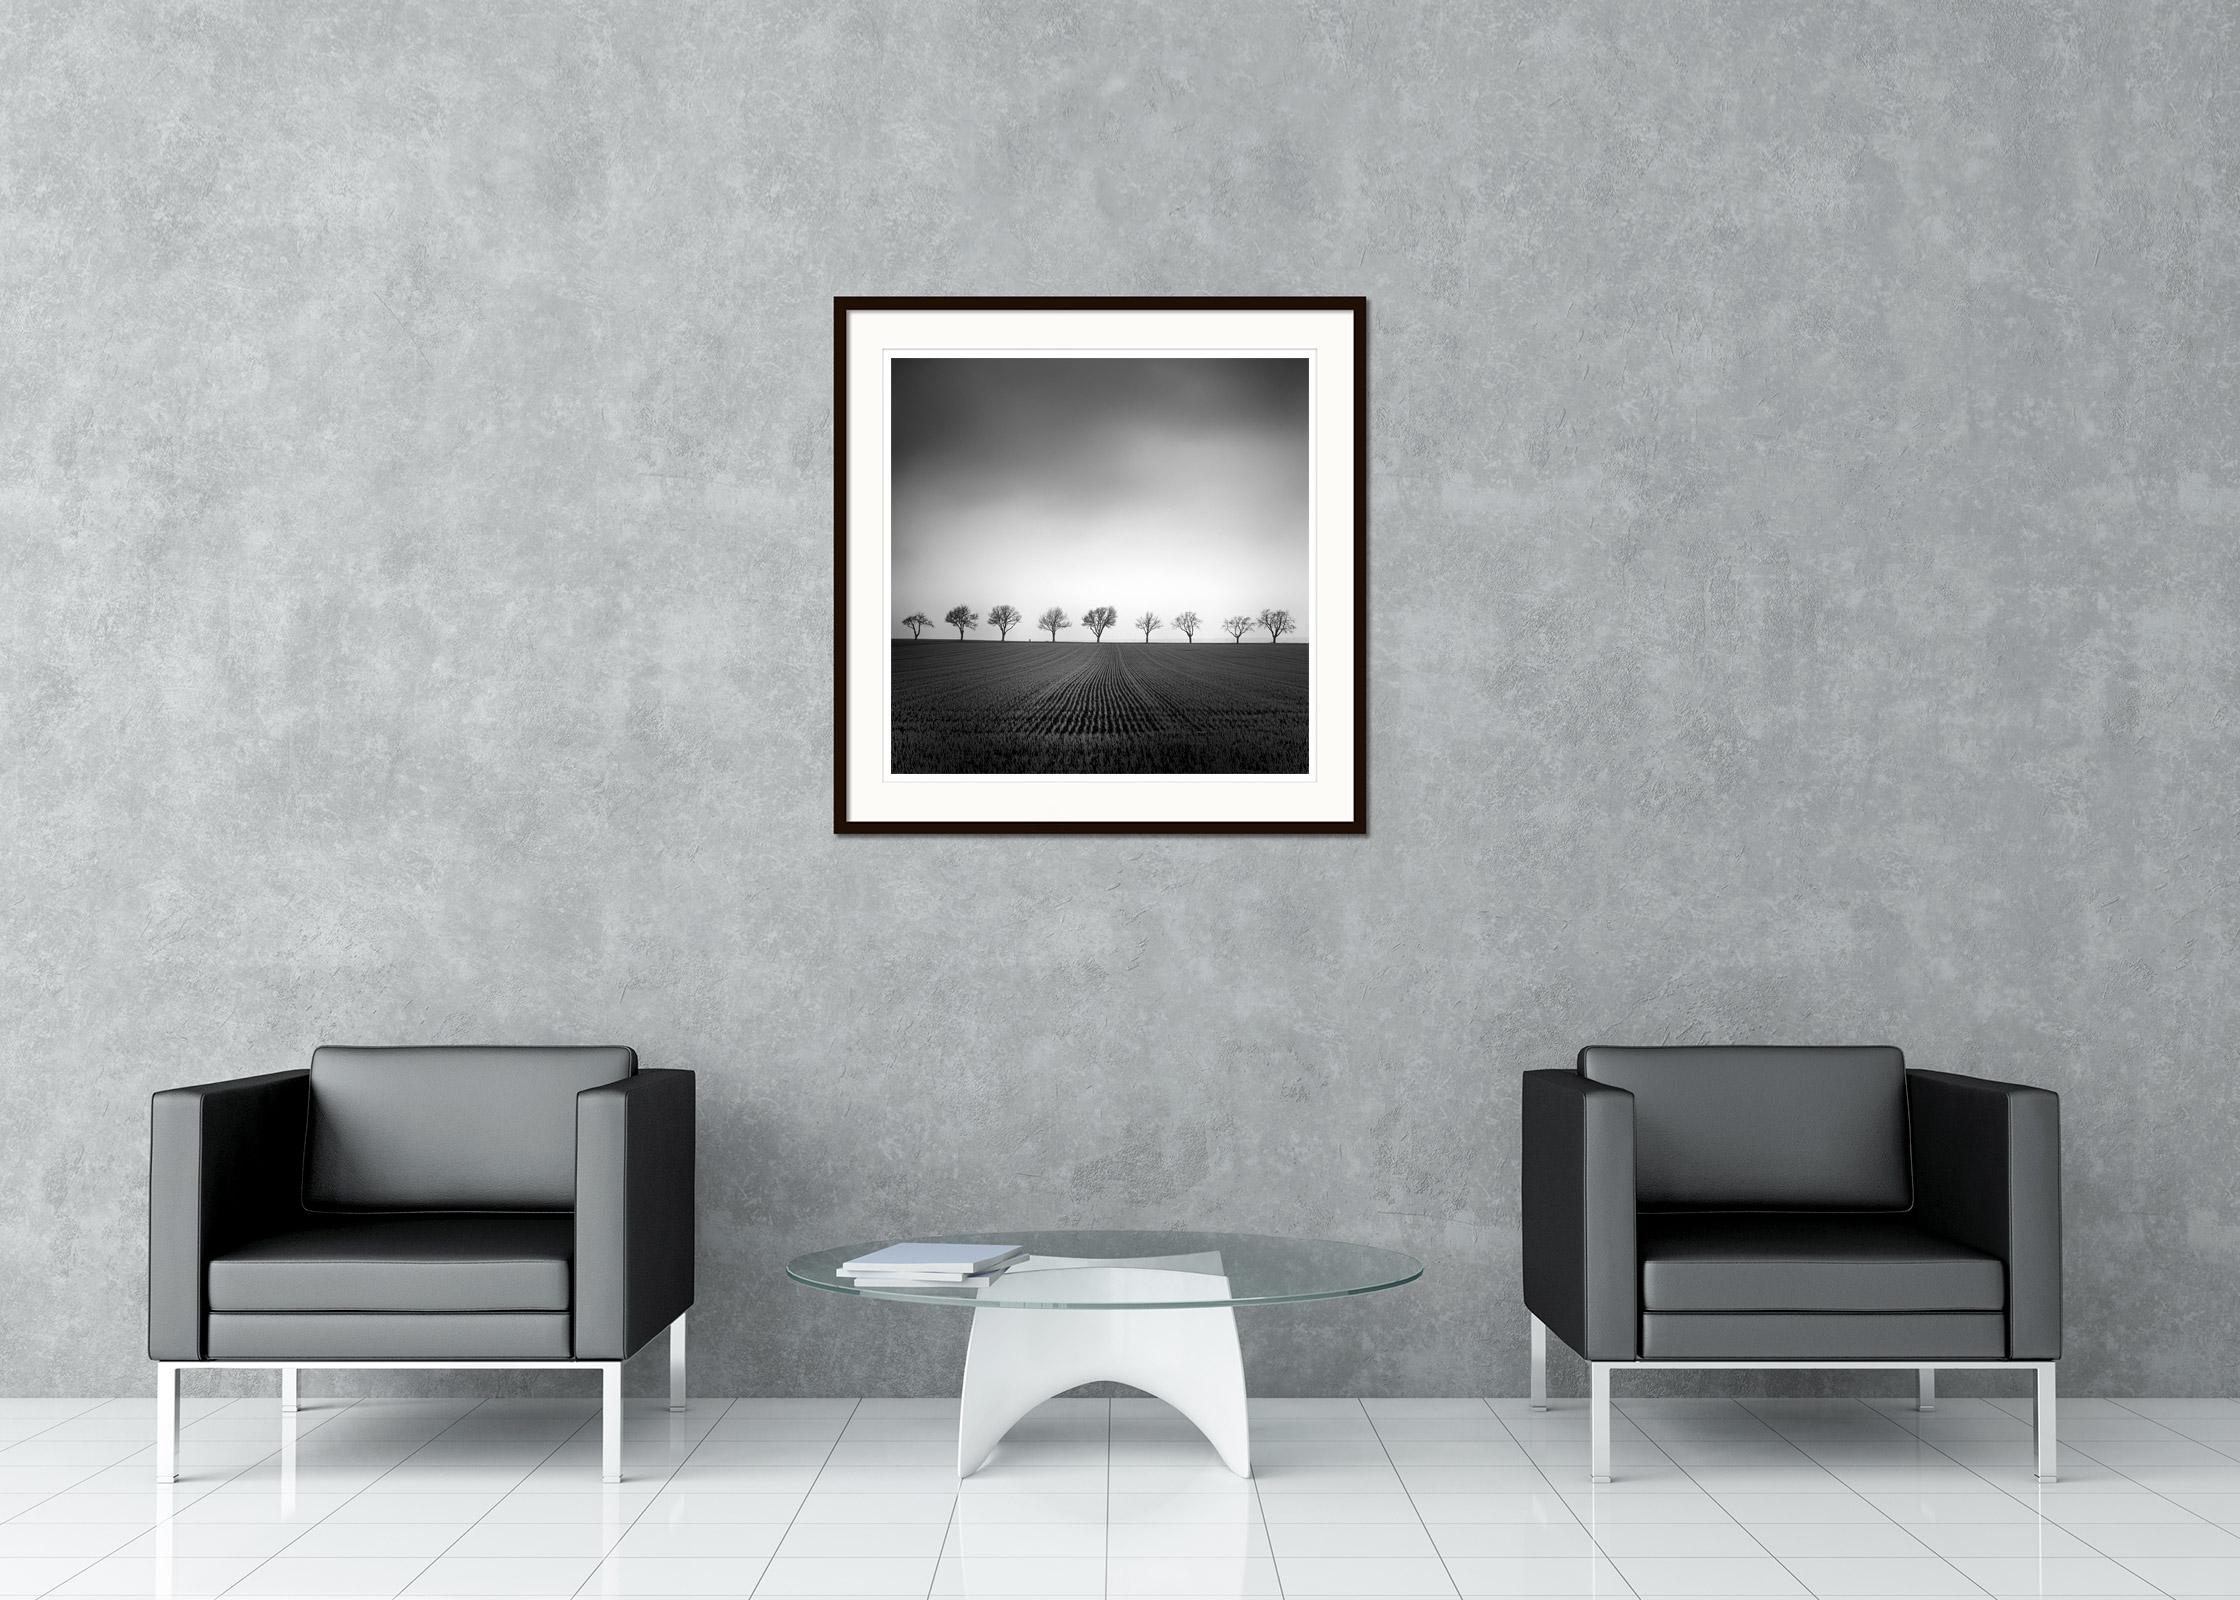 Black and White Fine Art Landscape Photography - Nine cherry trees in a row with a corn field in the foreground. Archival pigment ink print, edition of 9. Signed, titled, dated and numbered by artist. Certificate of authenticity included. Printed